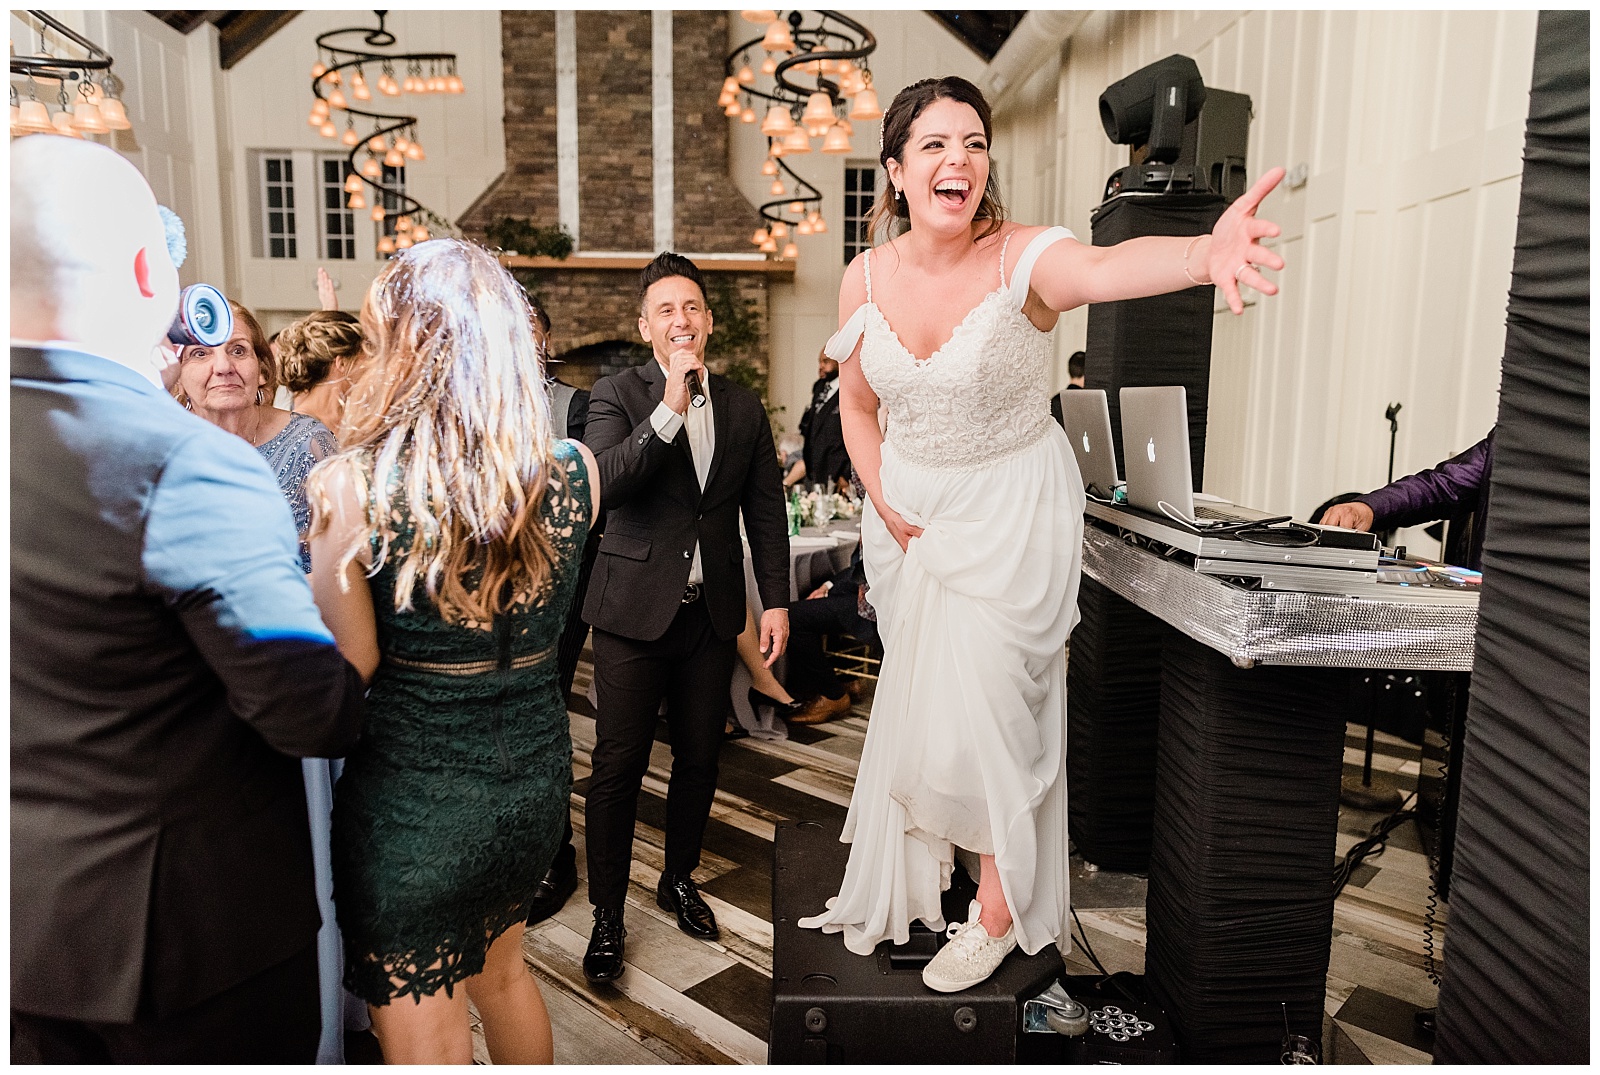 Bride dances during the reception and stands on a speaker.